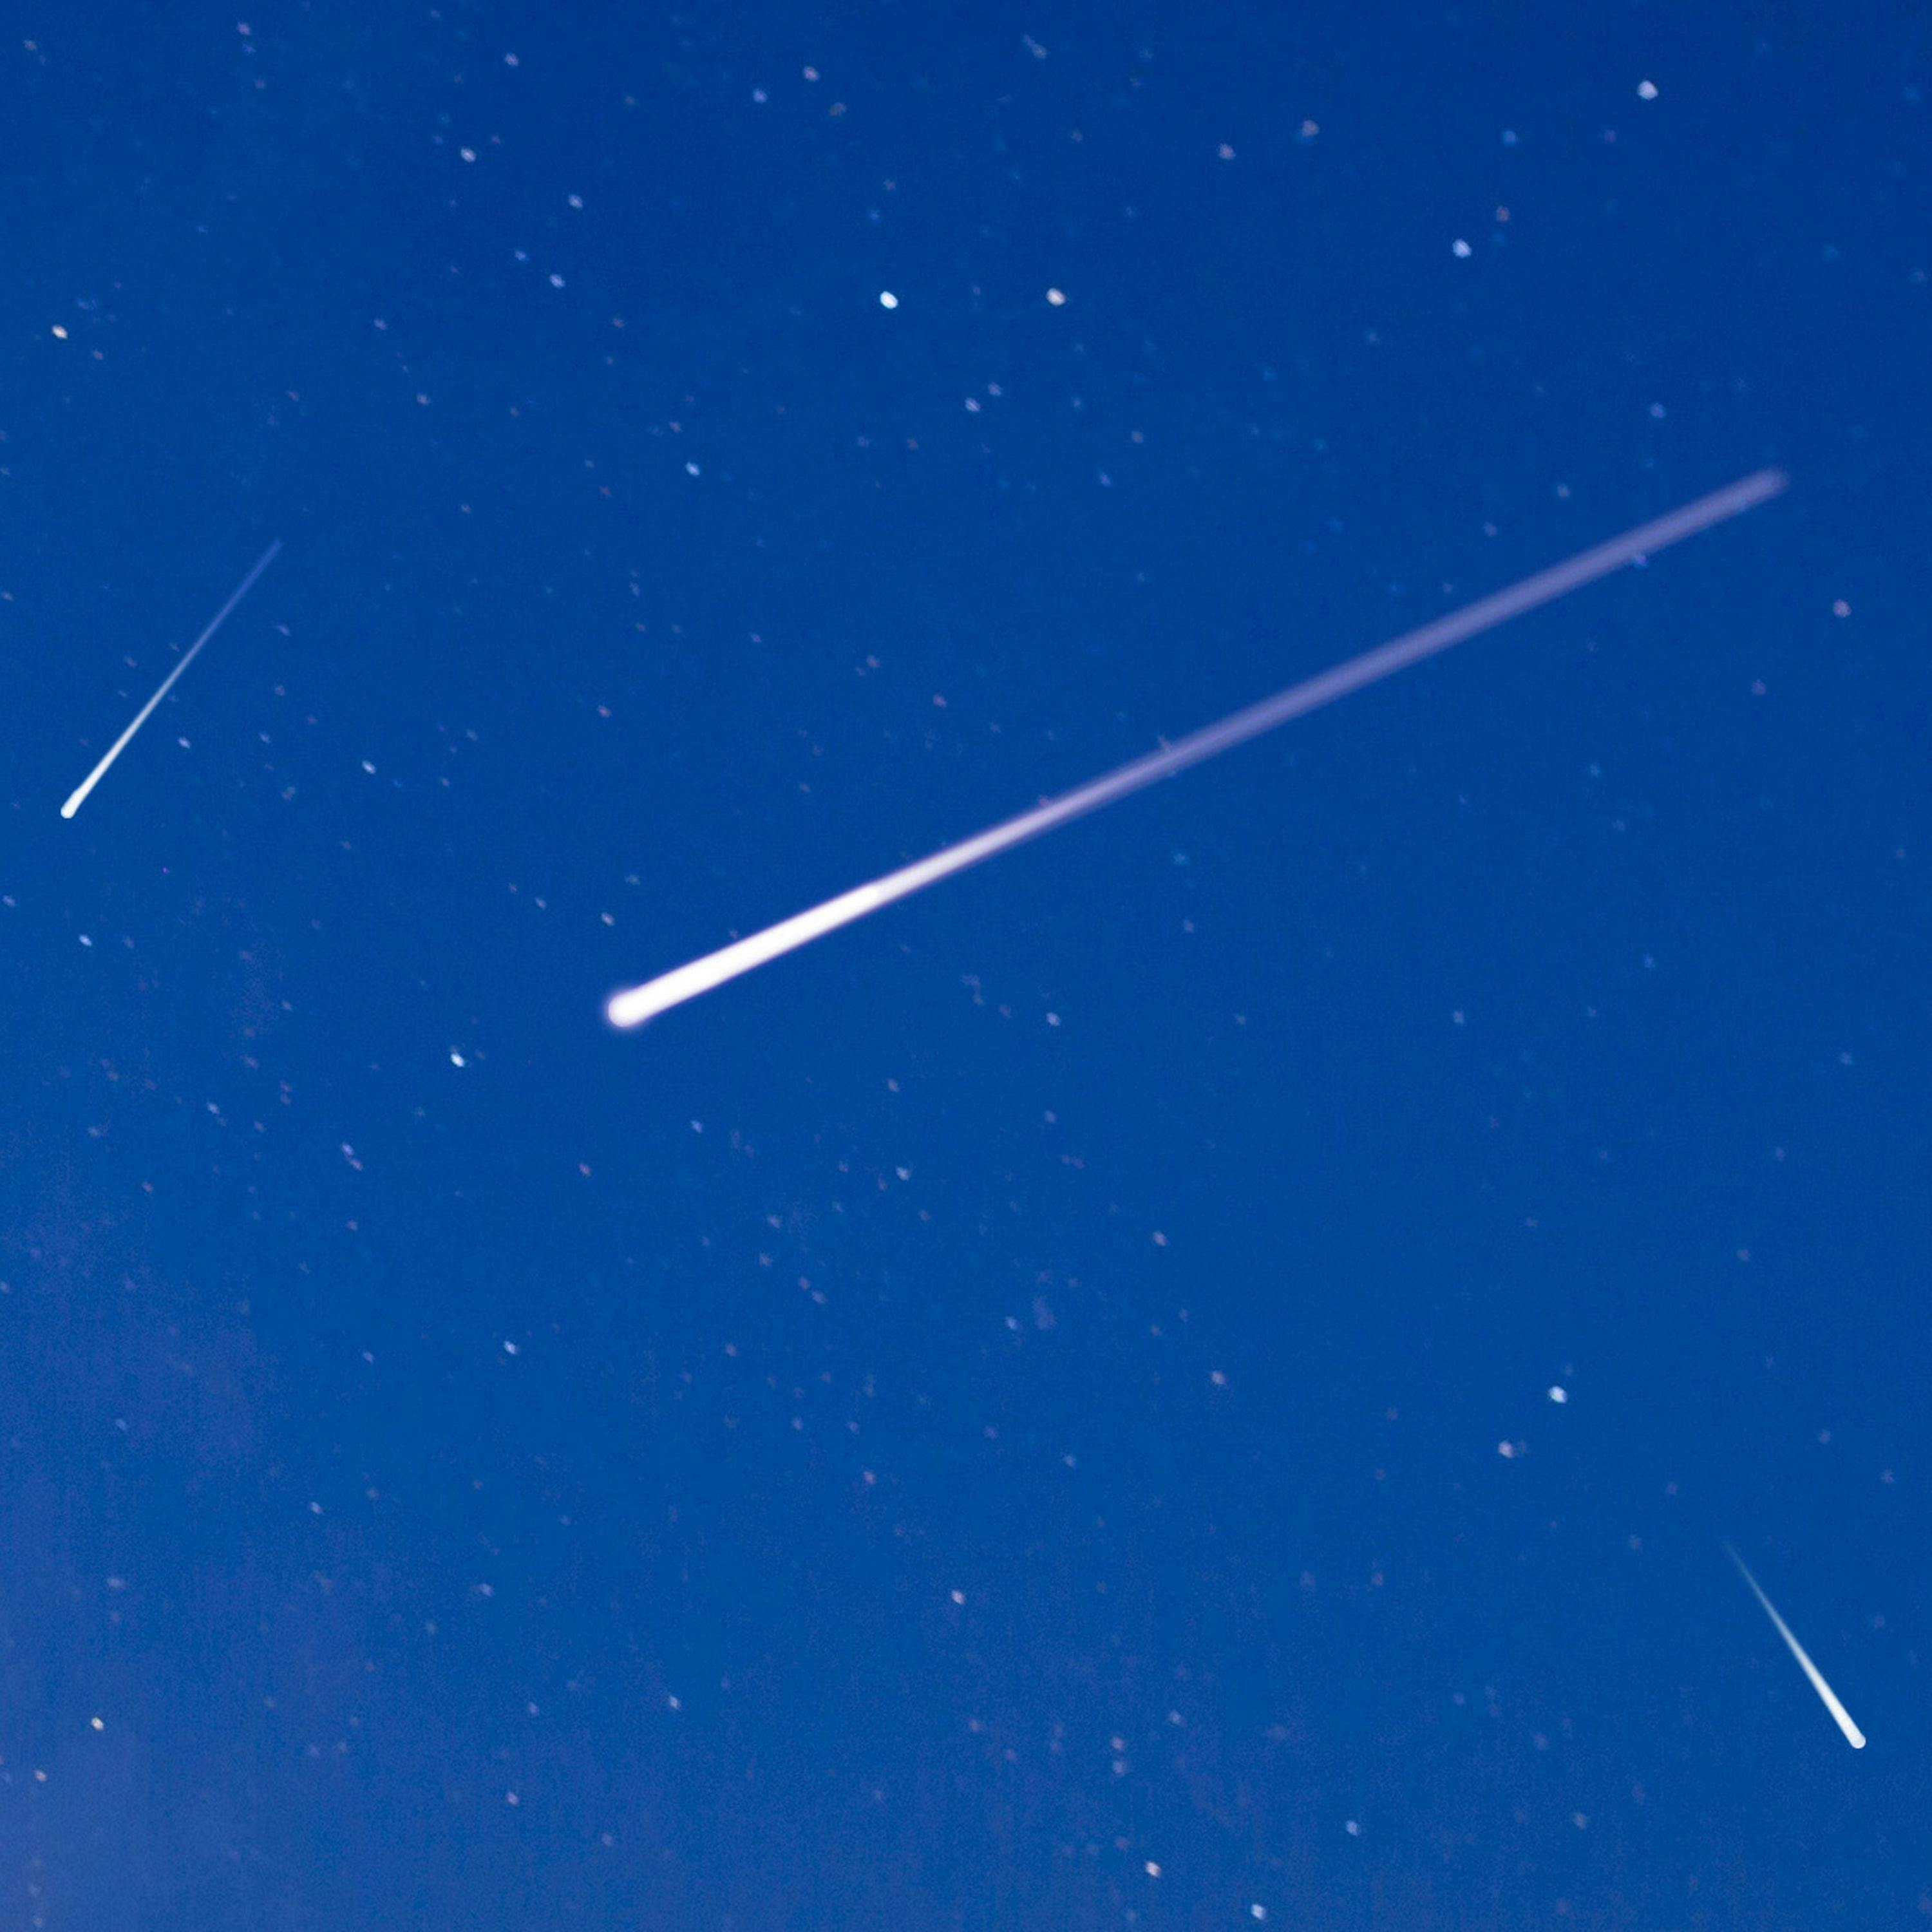 Meteor showers and space rocks that fall to Earth